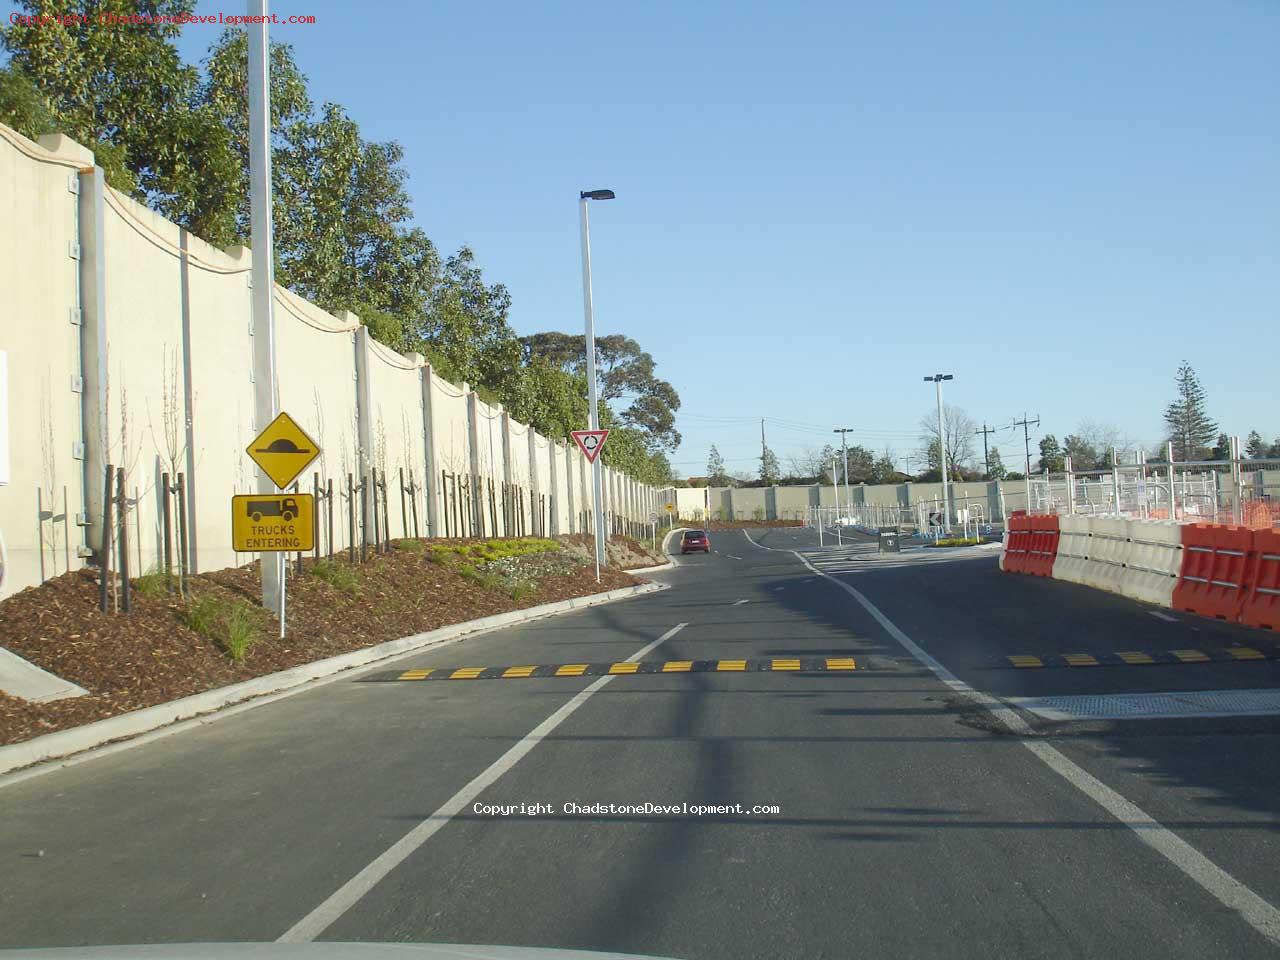 Speed humps installed on perimiter (ring) rd - Chadstone Development Discussions